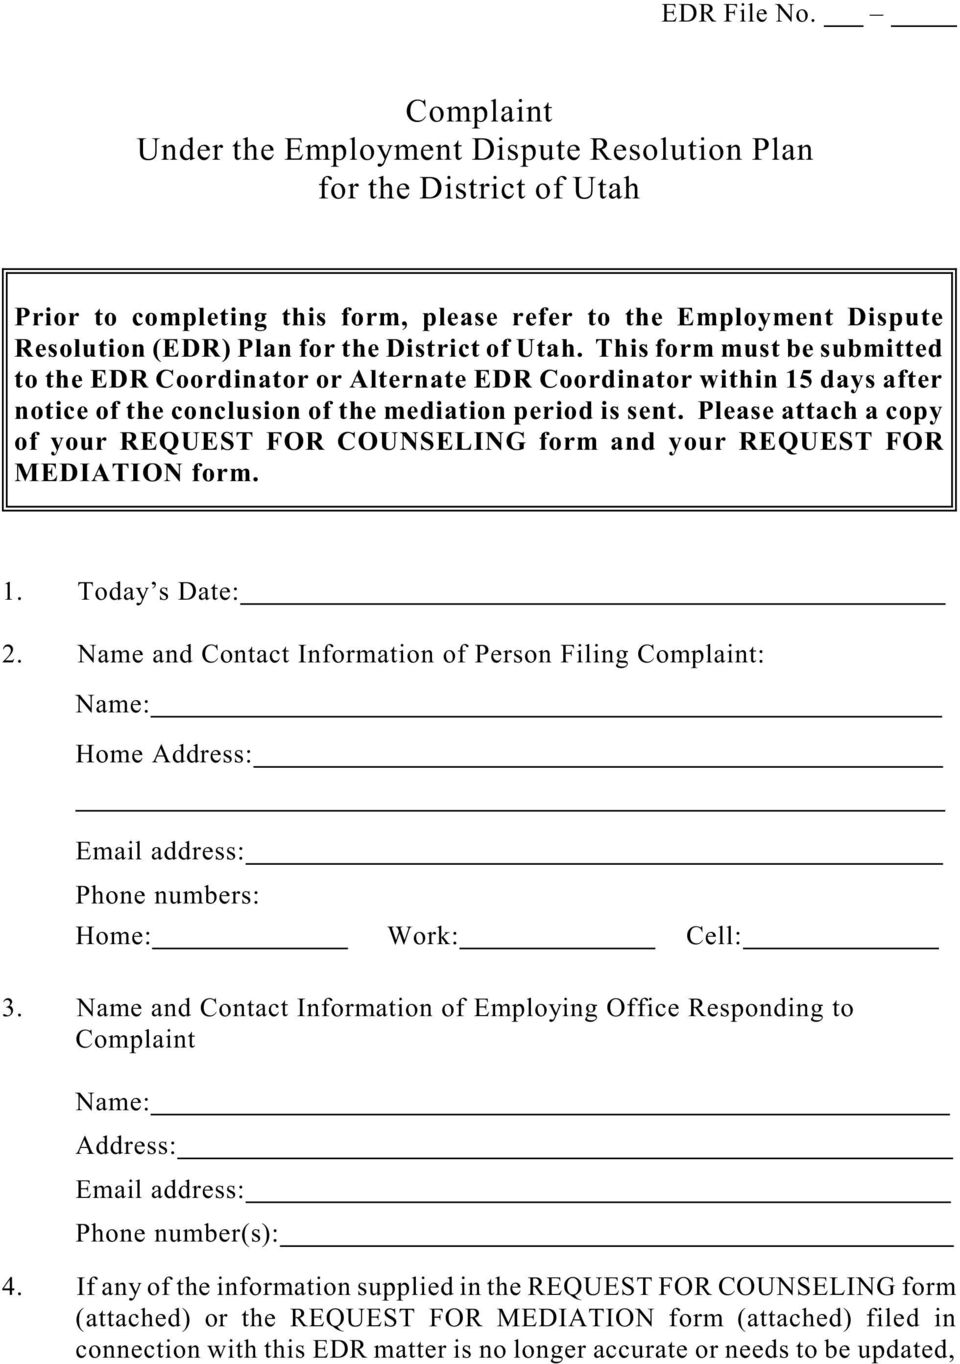 This form must be submitted to the EDR Coordinator or Alternate EDR Coordinator within 15 days after notice of the conclusion of the mediation period is sent.